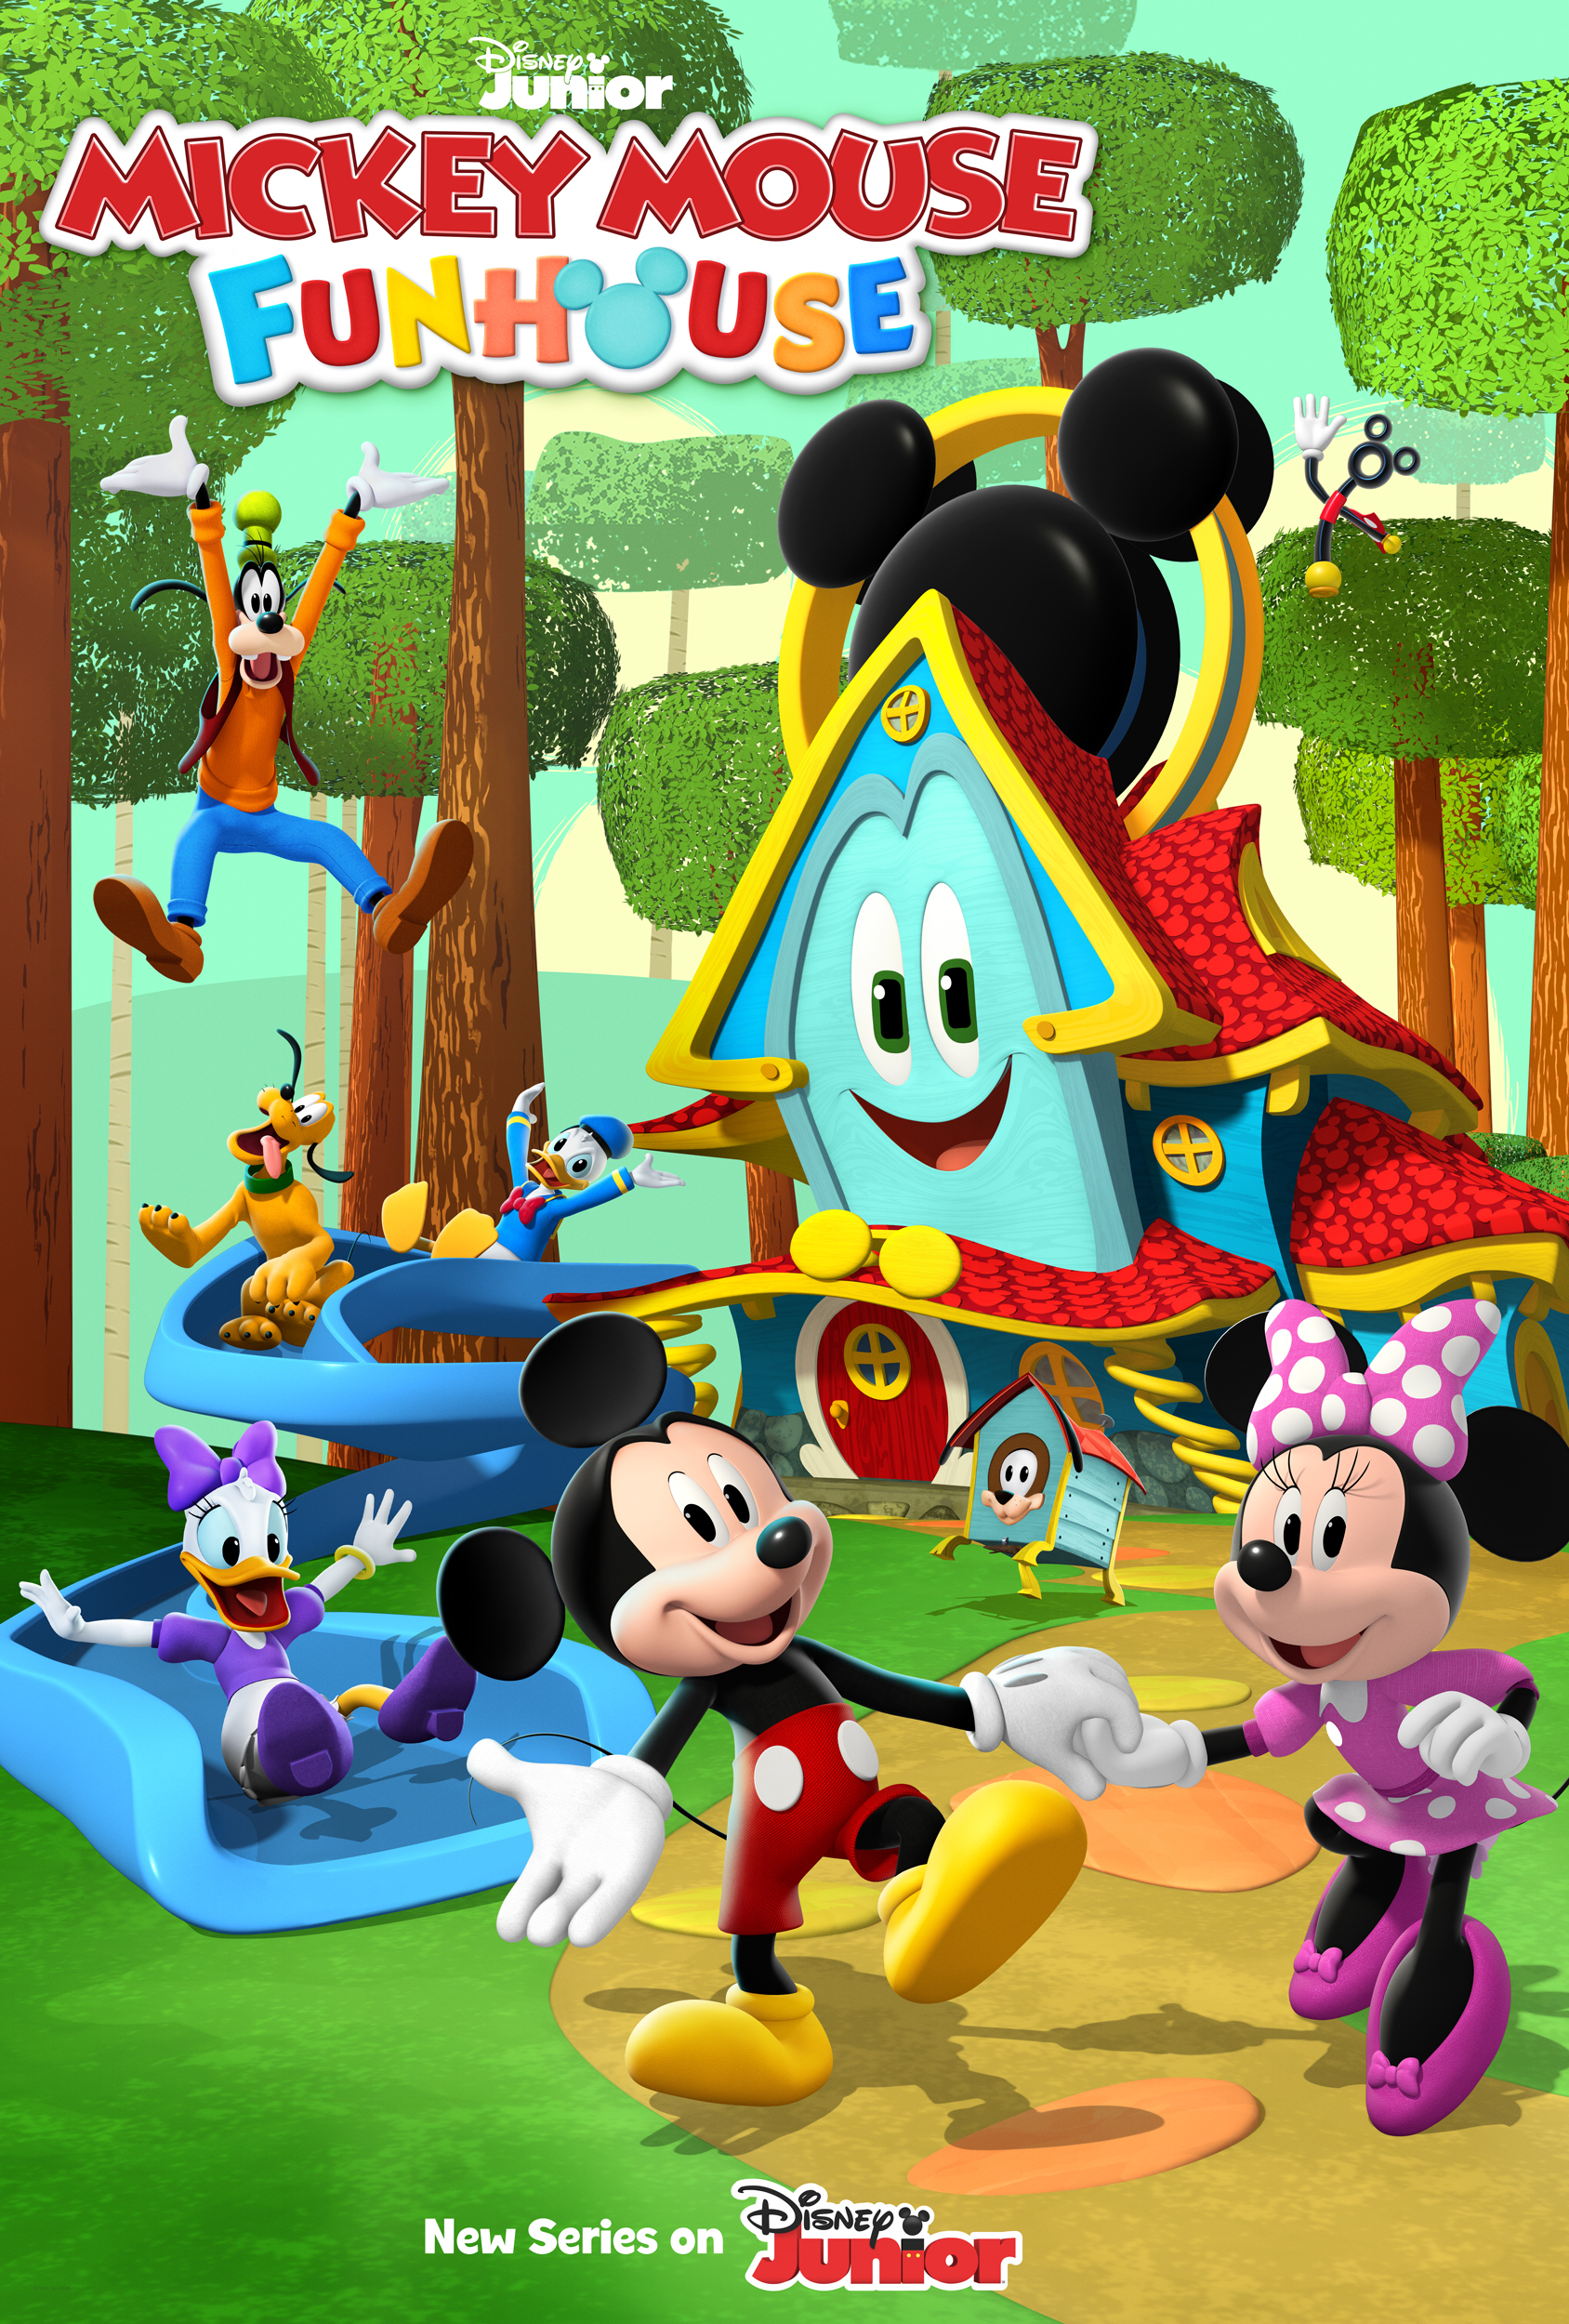 What's New on Disney Channel & Disney Junior – July 2021